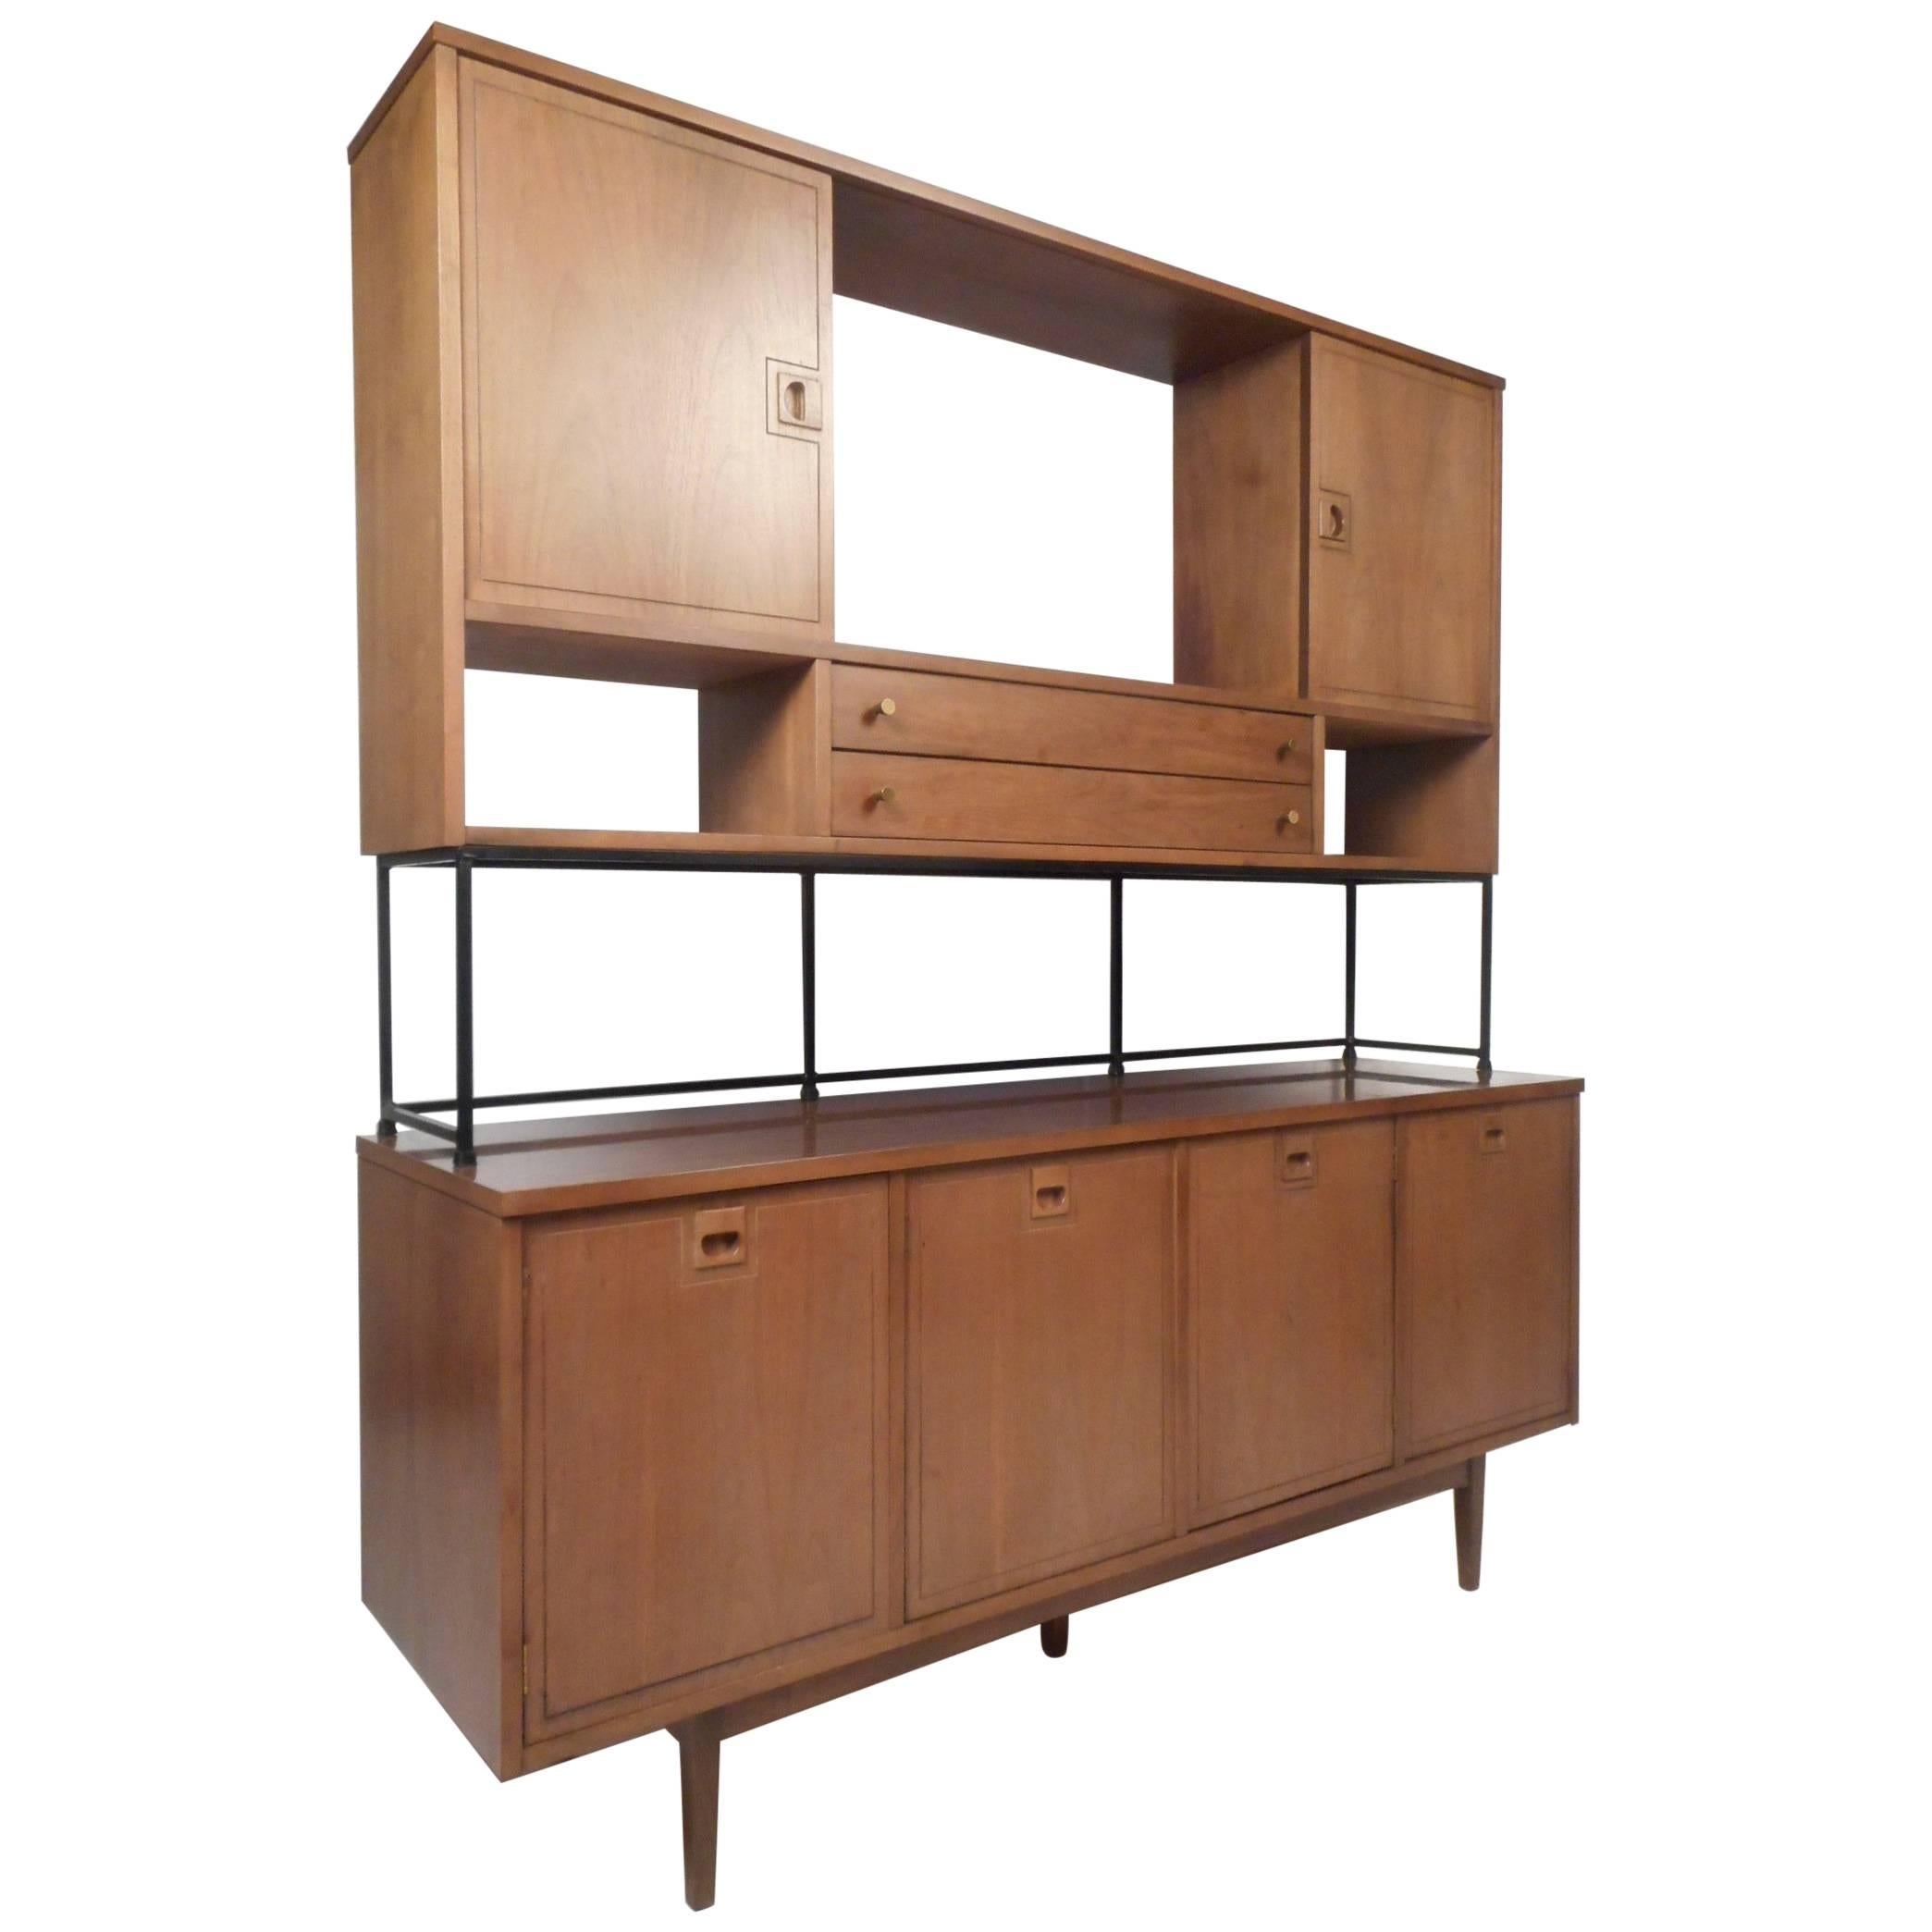 Impressive Two-Piece Midcentury Wall Unit by Stanley